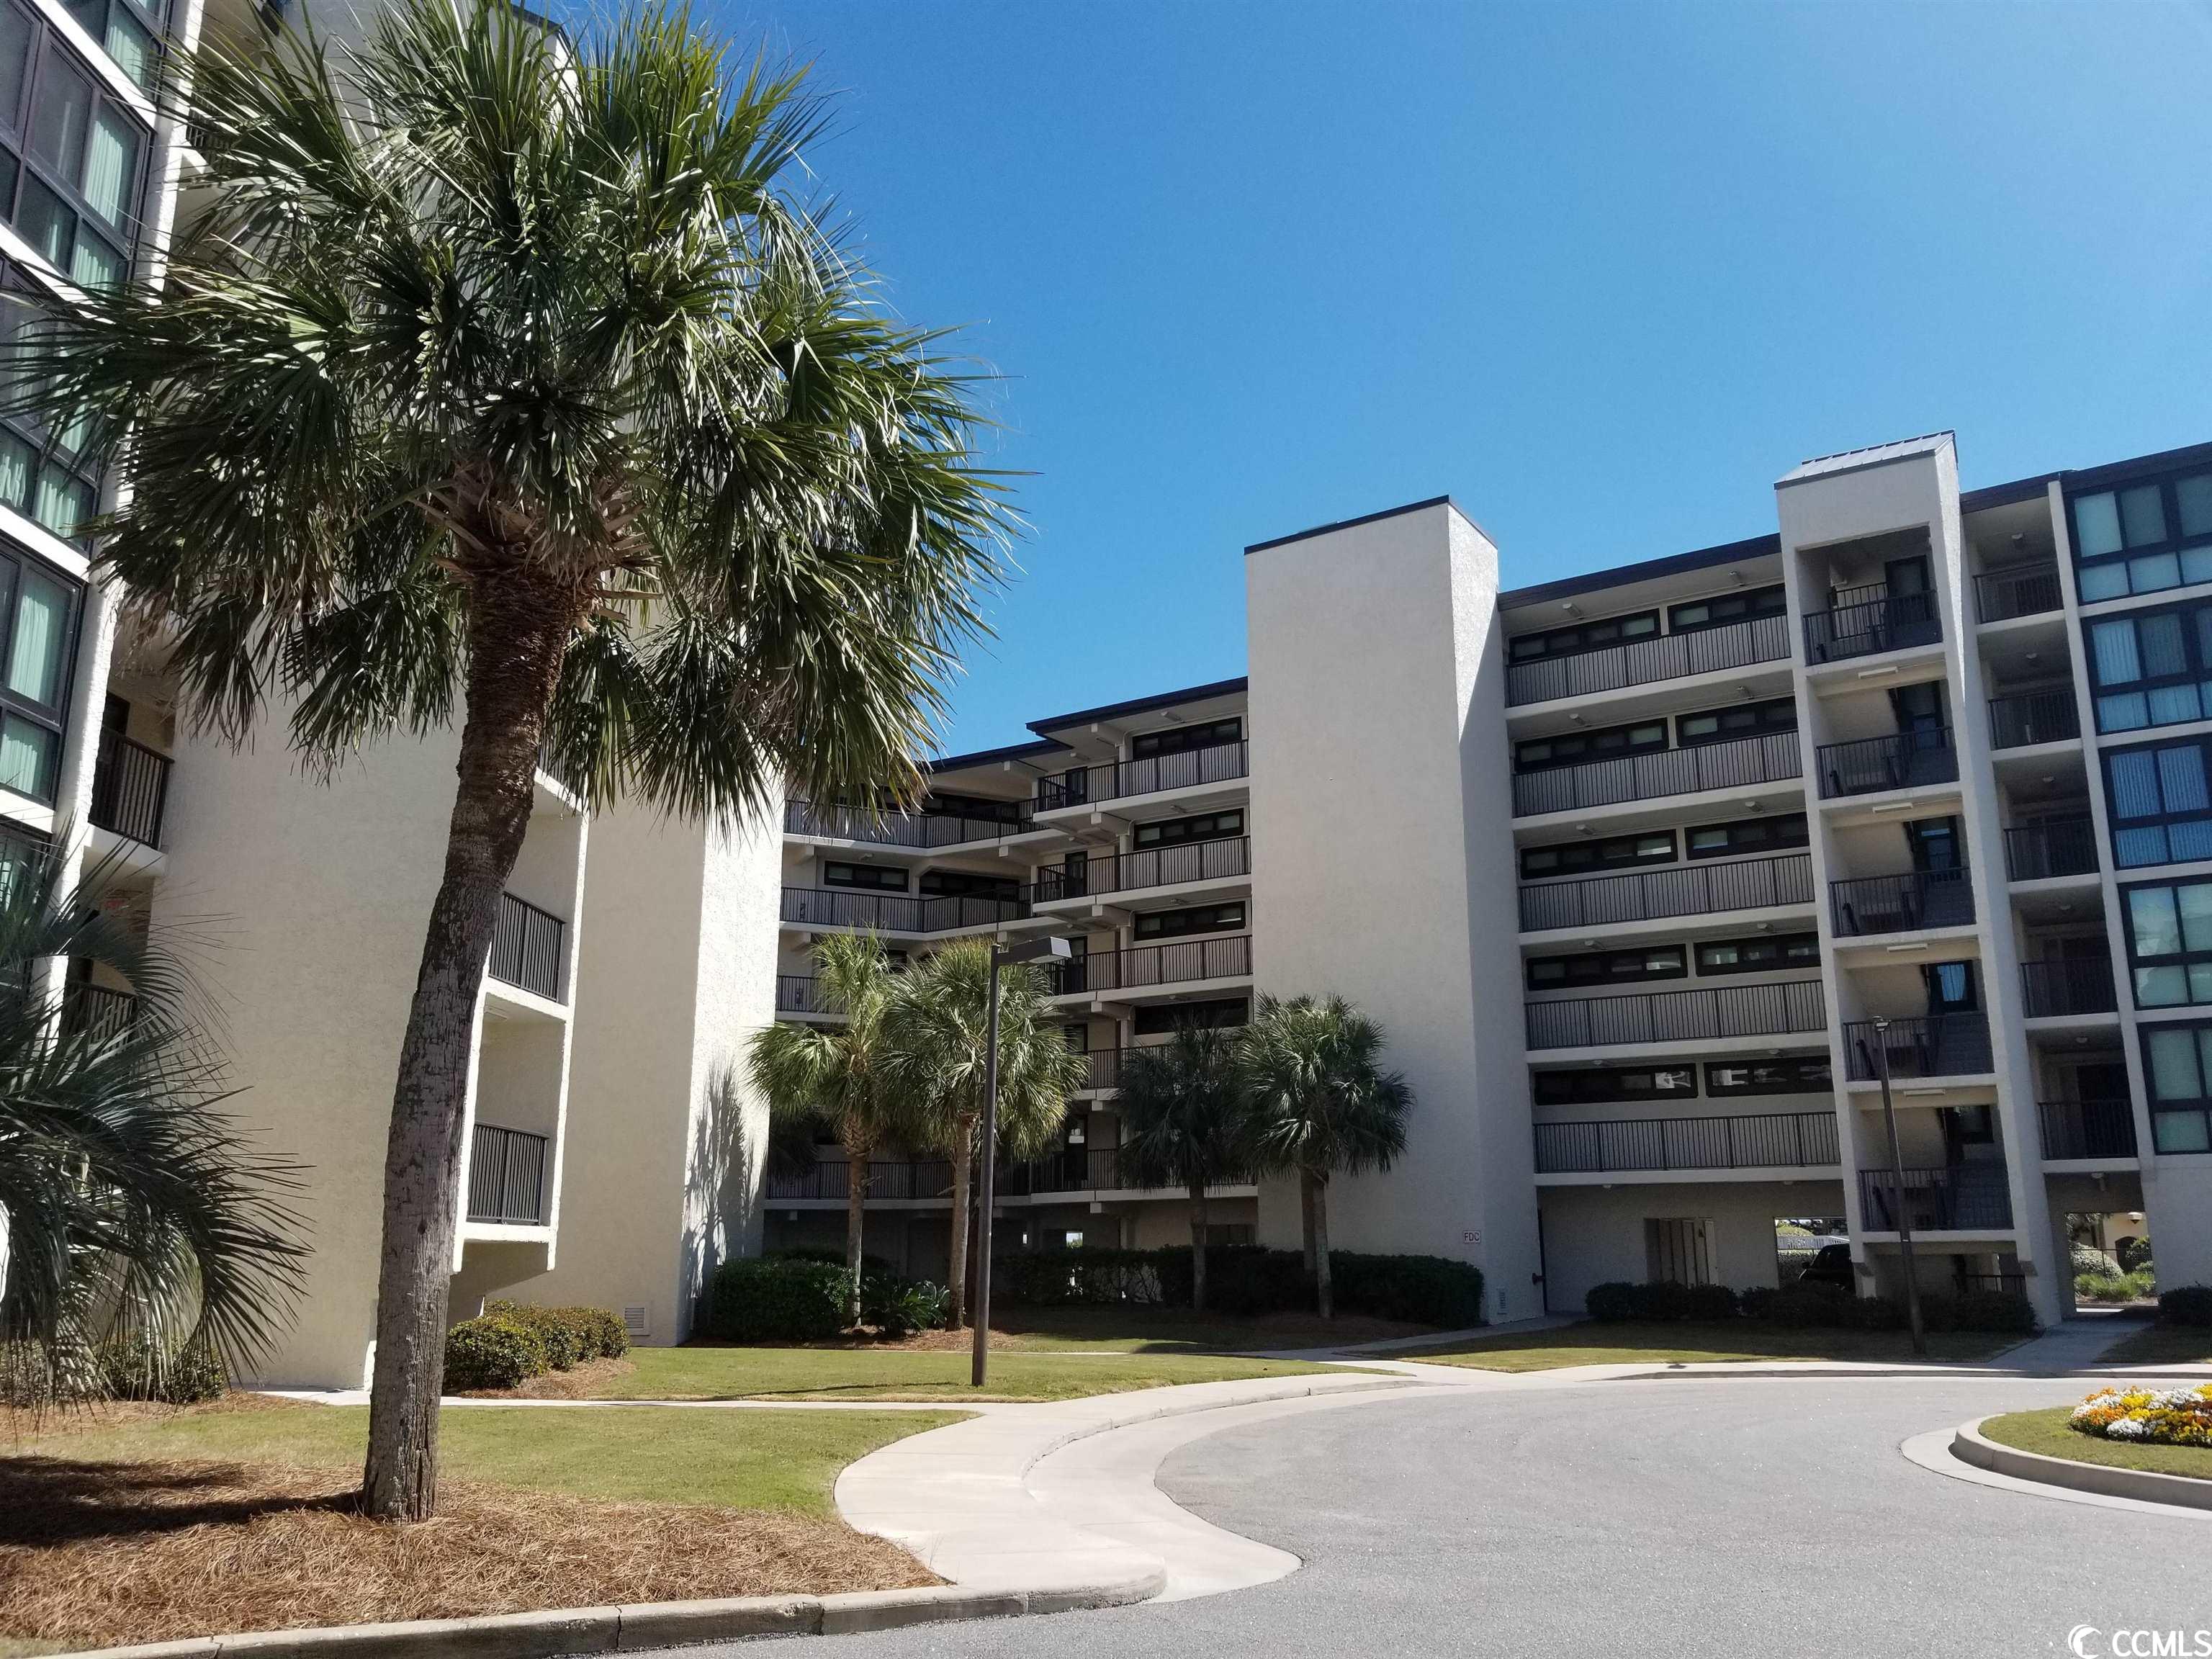 come enjoy the beach 2 times a year in this top floor interval ownership. direct oceanfront building with fabulous views of the beach and ocean. located in gated community that offers pool, tennis, pickle ball, walking paths, fishing. and more.